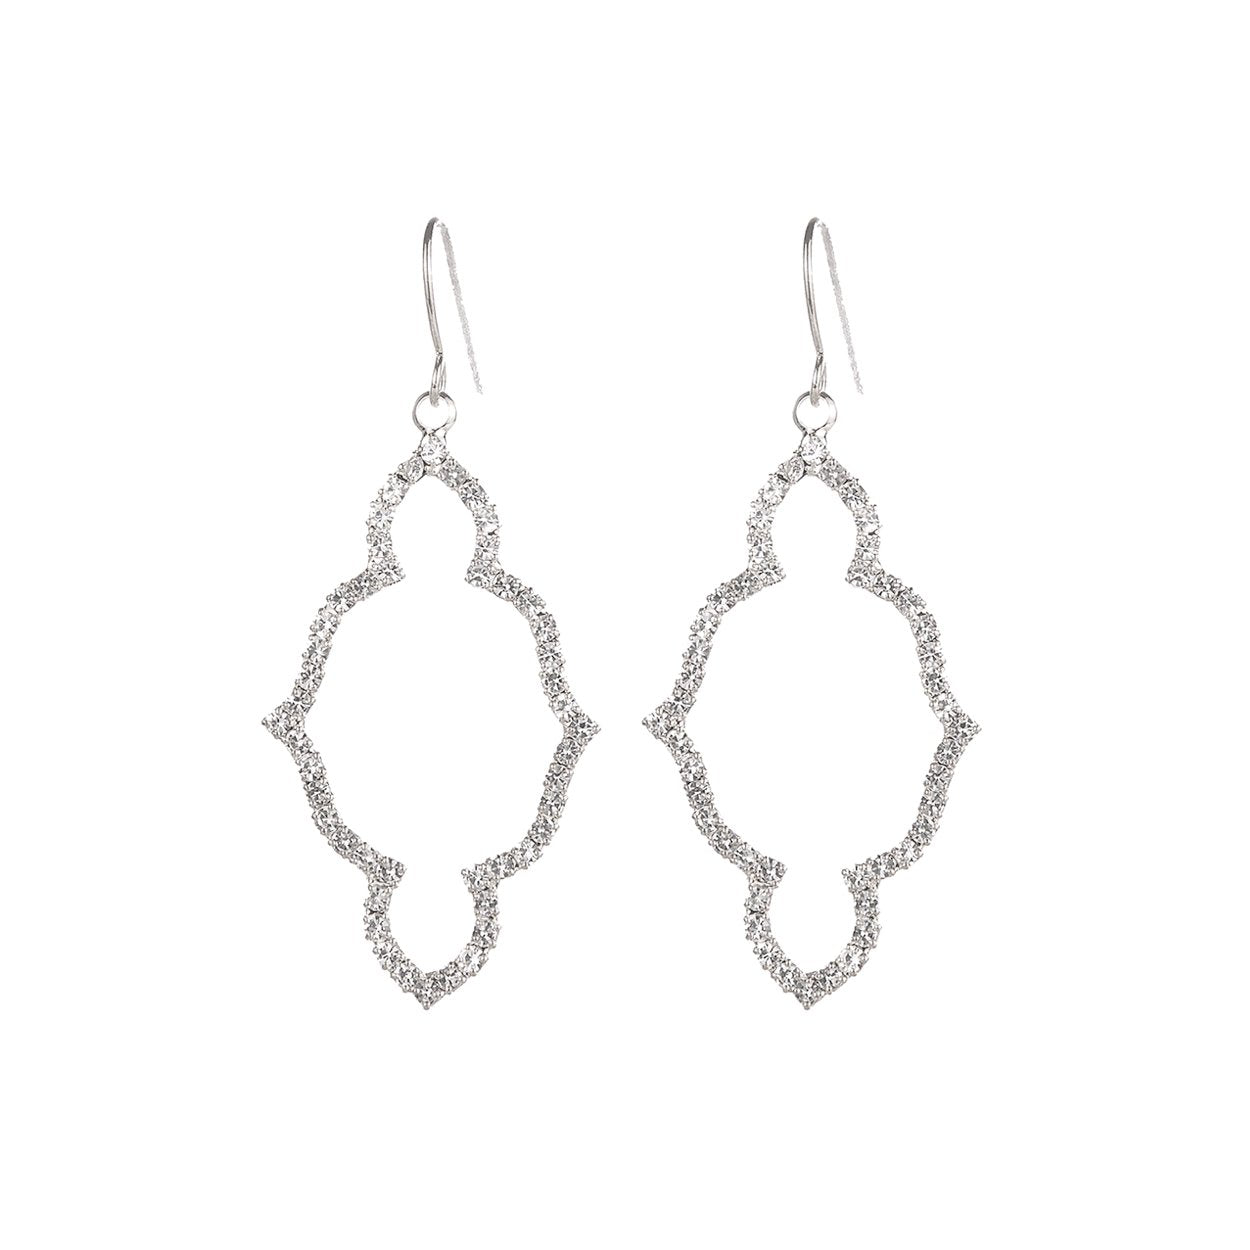 Moroccan Shaped Stunning Pave Crystal Elongated Barbed Quatrefoil Dangle Earrings St. Patrick's Day, 2" (Dainty Silver Tone Clear Crystal)